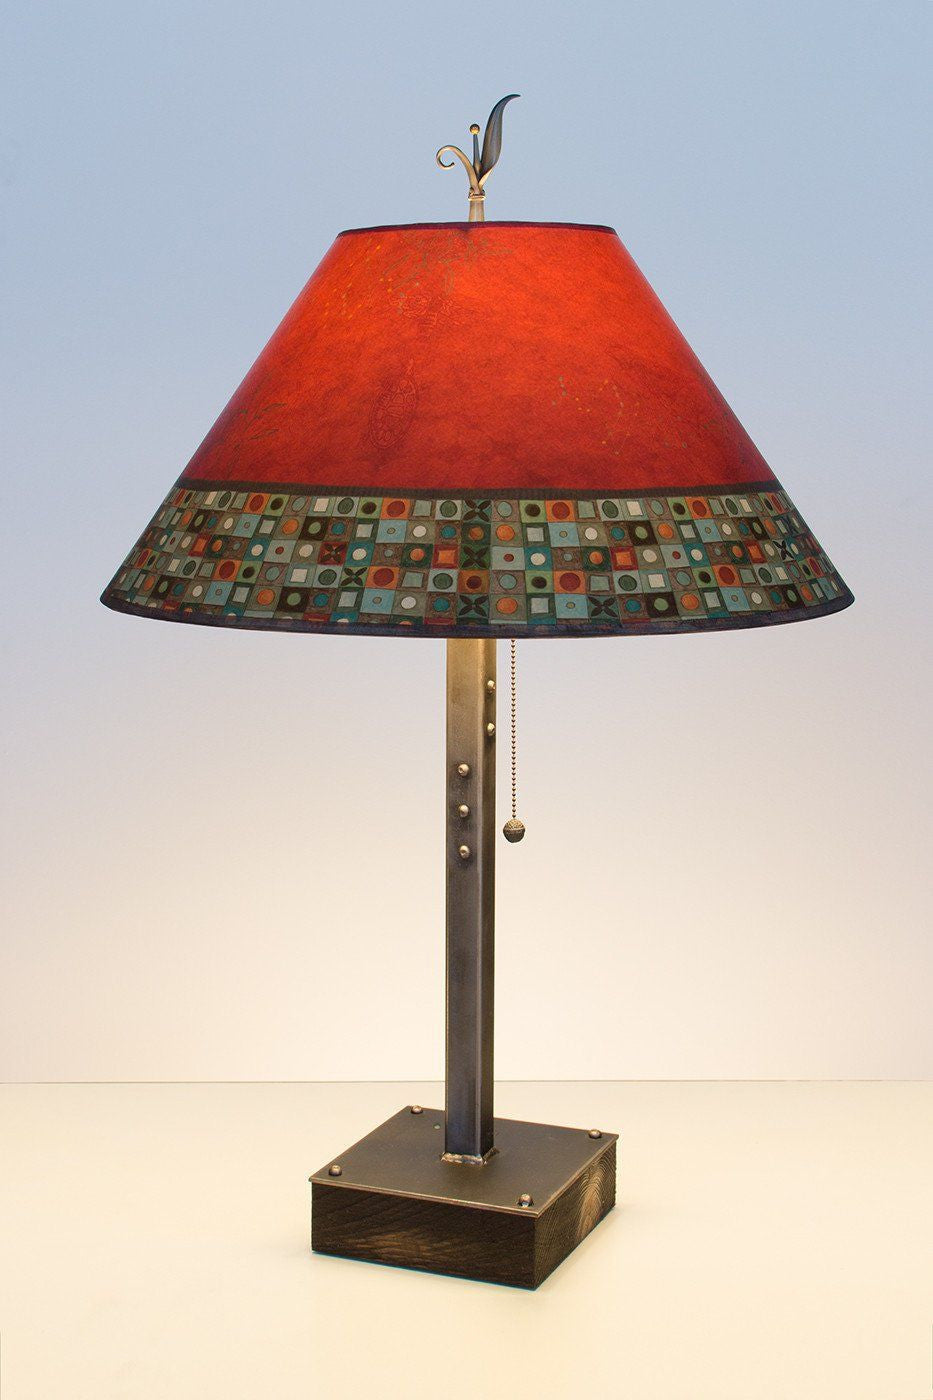 Steel Table Lamp on Wood with Large Conical Shade in Red Mosaic